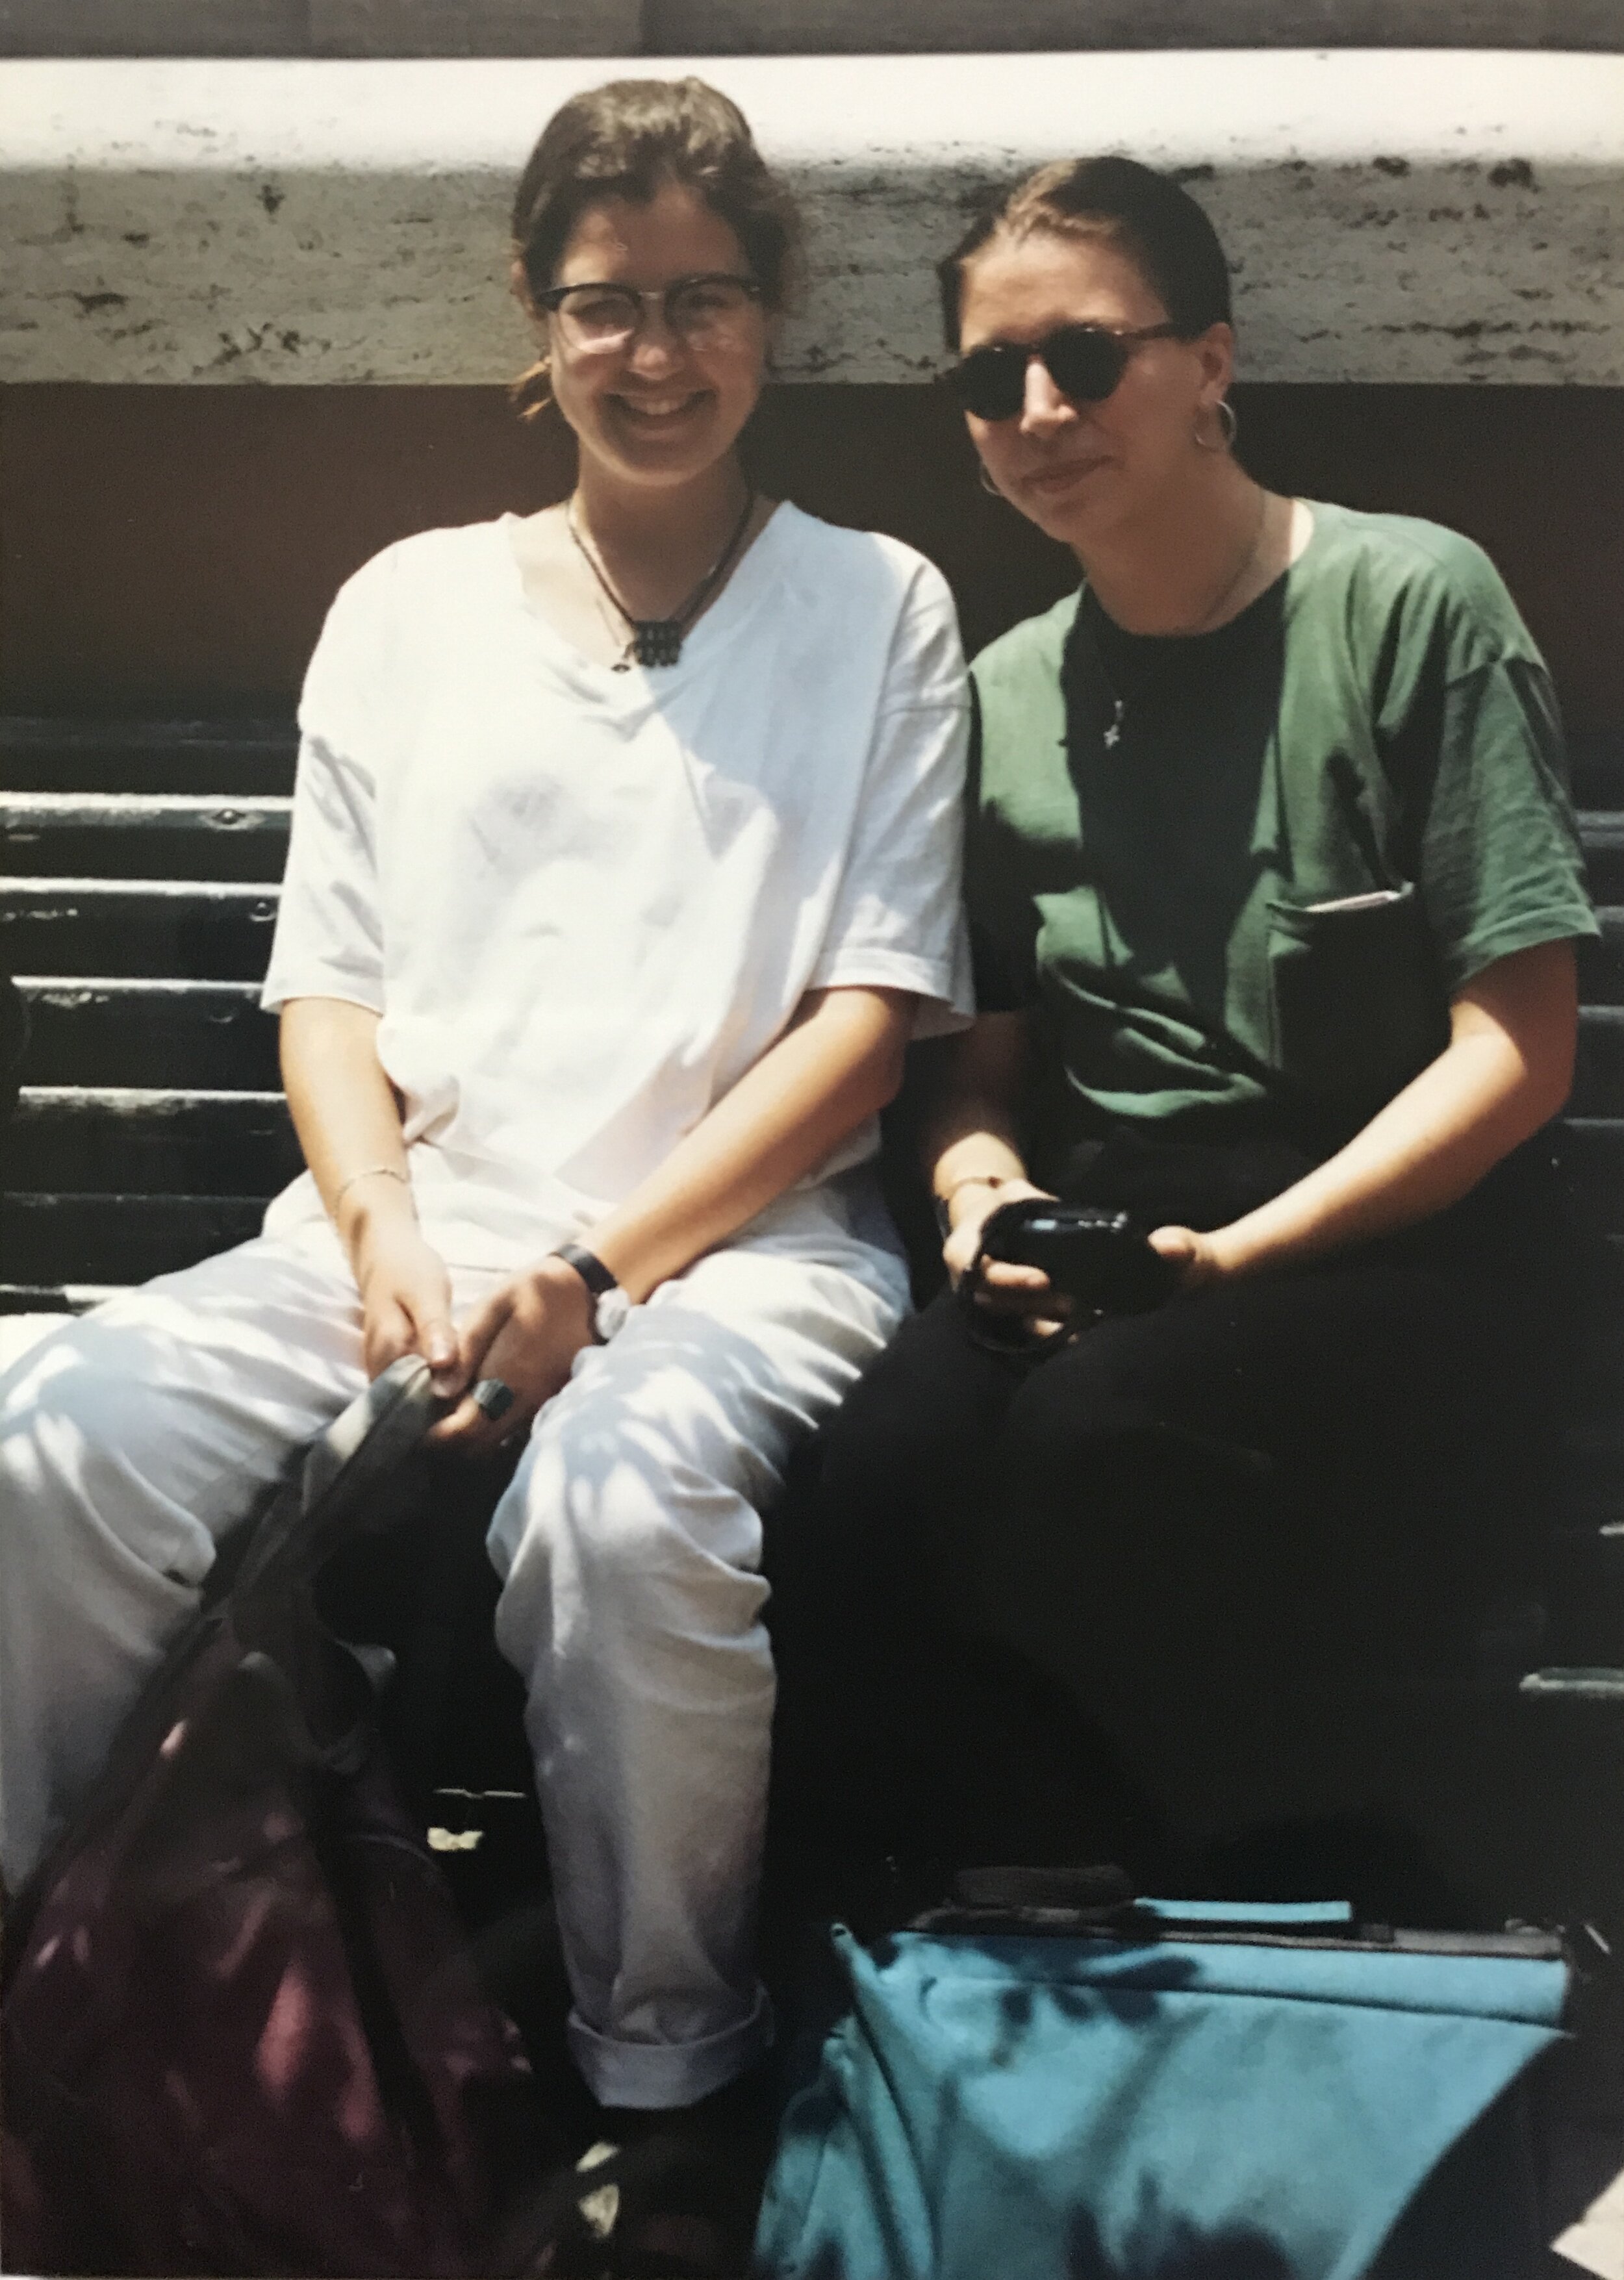   Sunny Sillane and Carrie Marie Hamilton in Rome , 1993 (photo: Wennie Huang) 